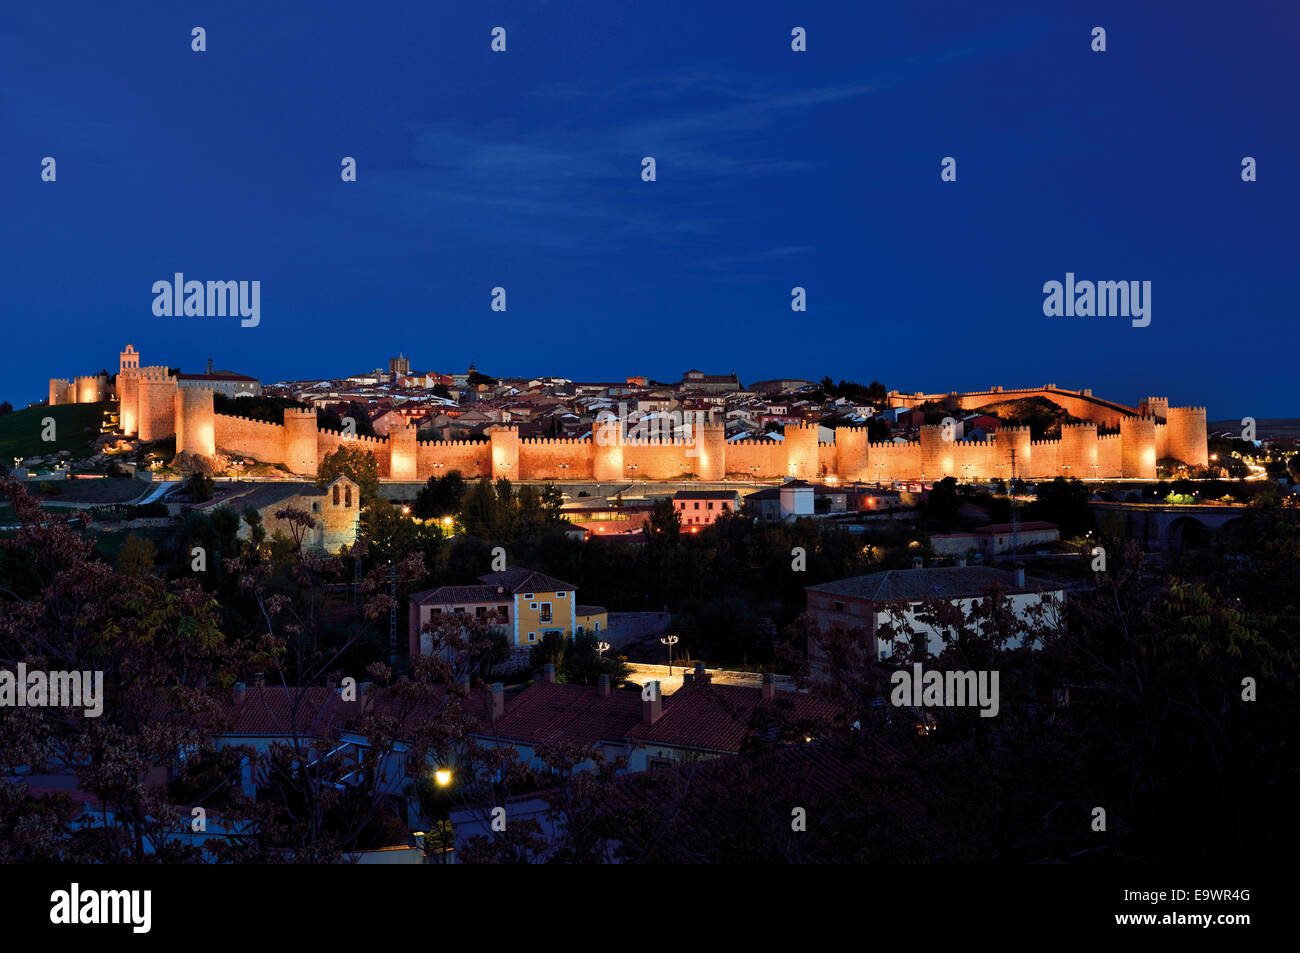 Spain, Castilla-Leon: Nocturnal view of the medieval town wall and historic city Ávila Stock Photo